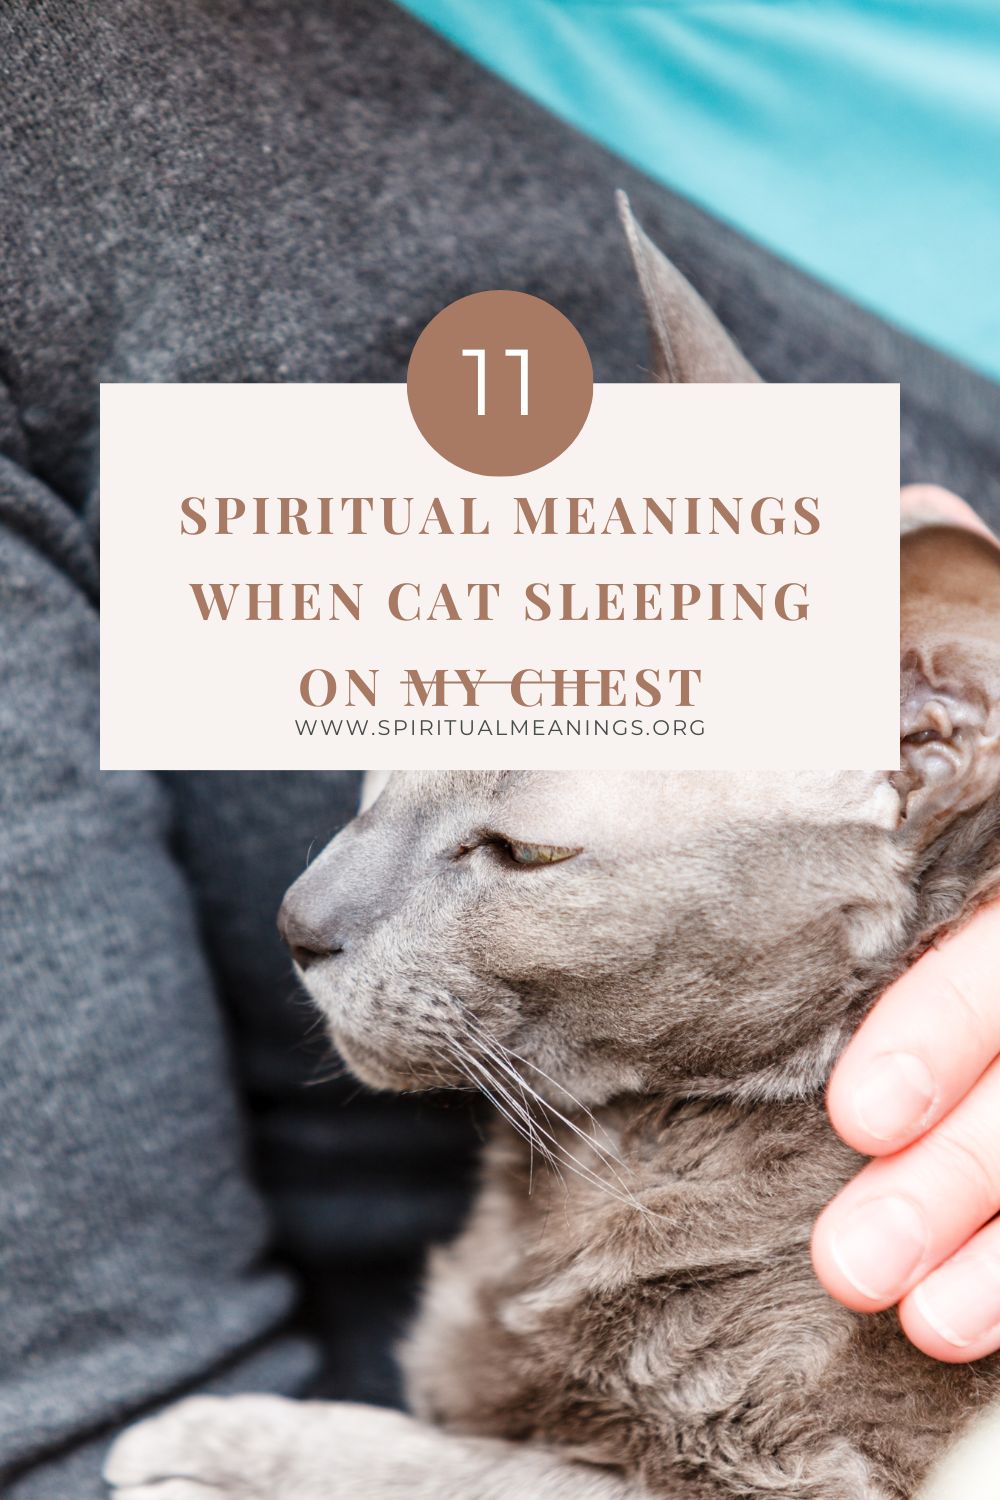 11 Spiritual Meanings When Cat Sleeping on My Chest pin